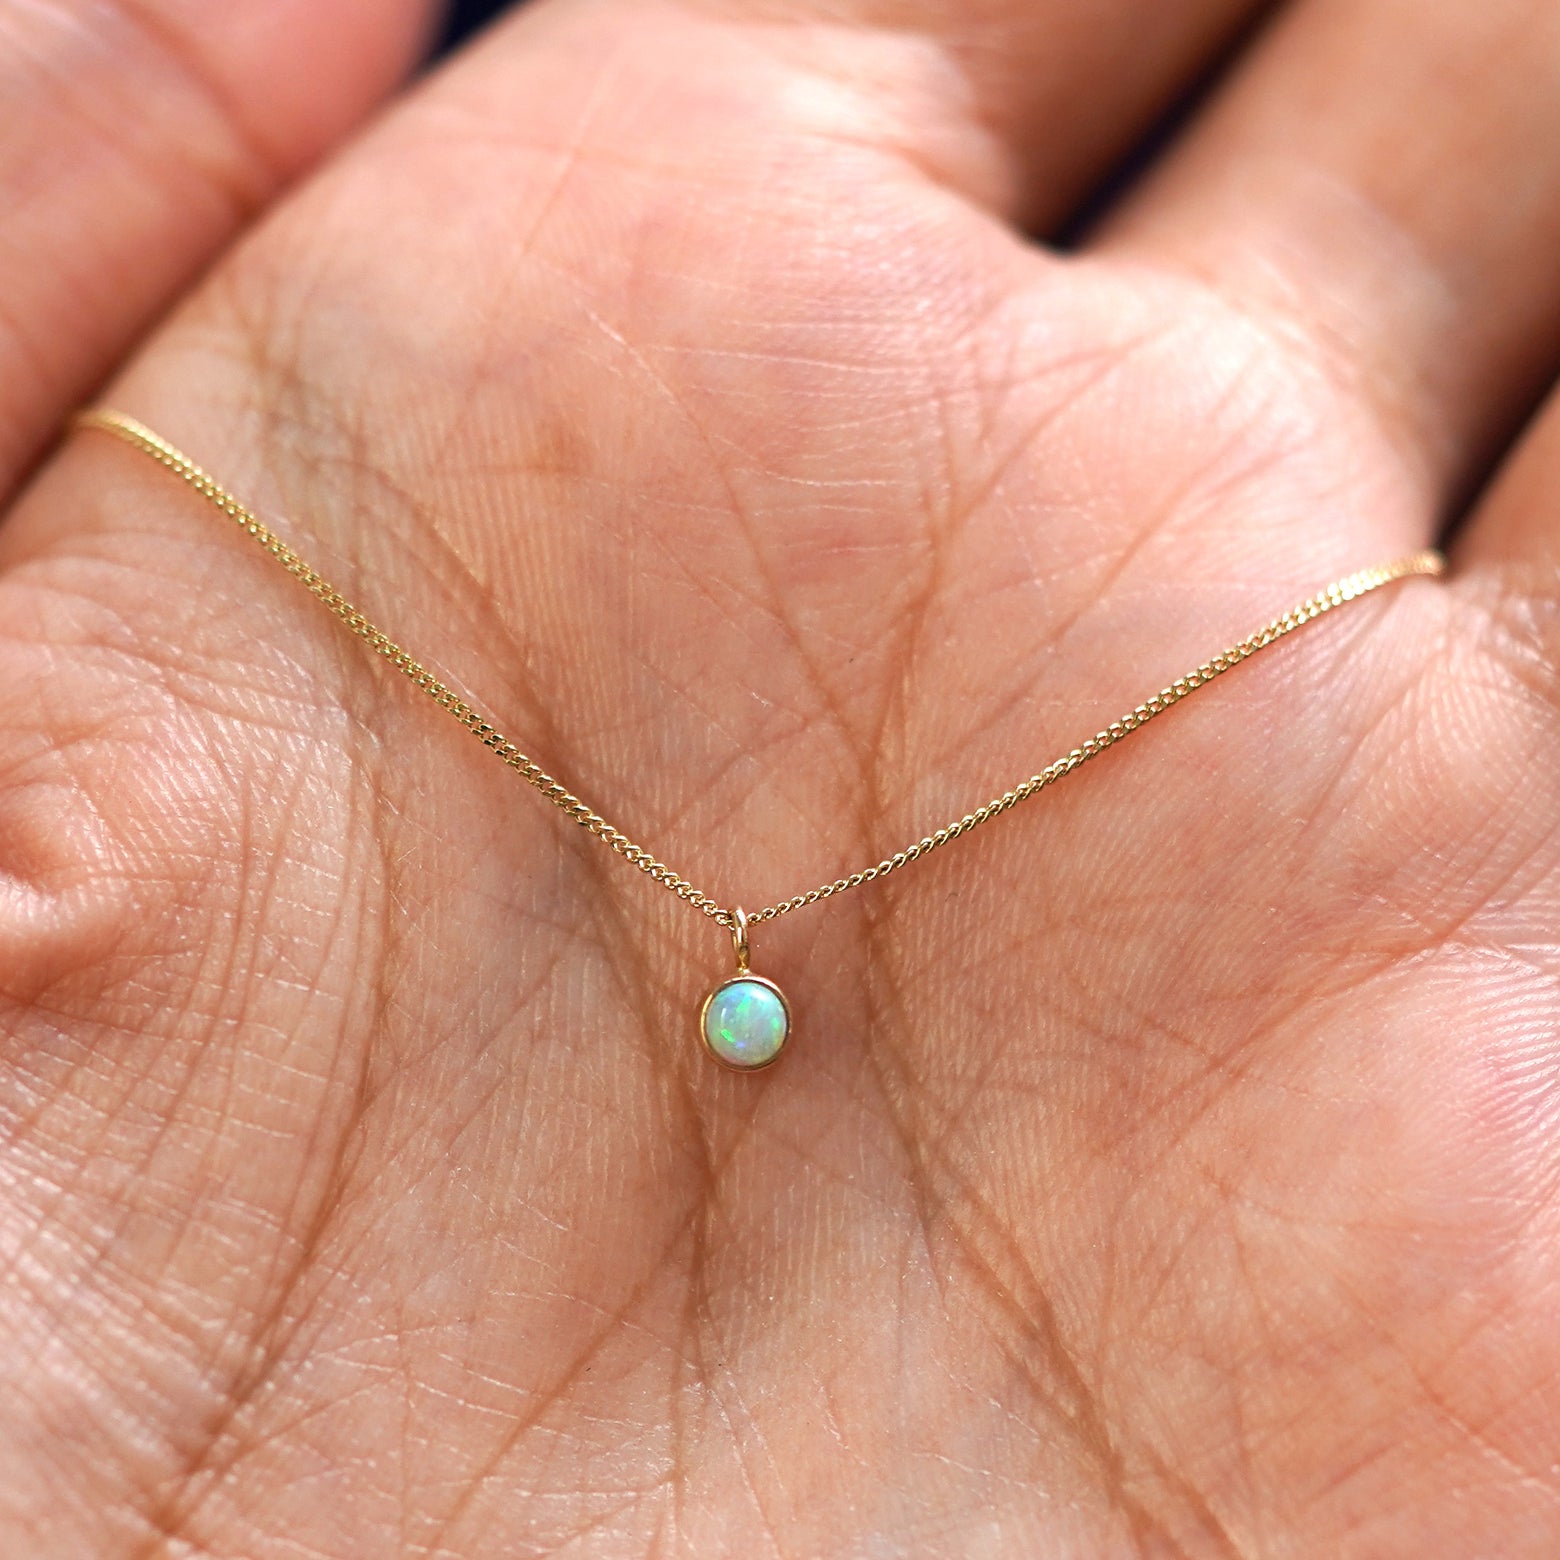 A solid 14k gold Opal Necklace resting in a models palm